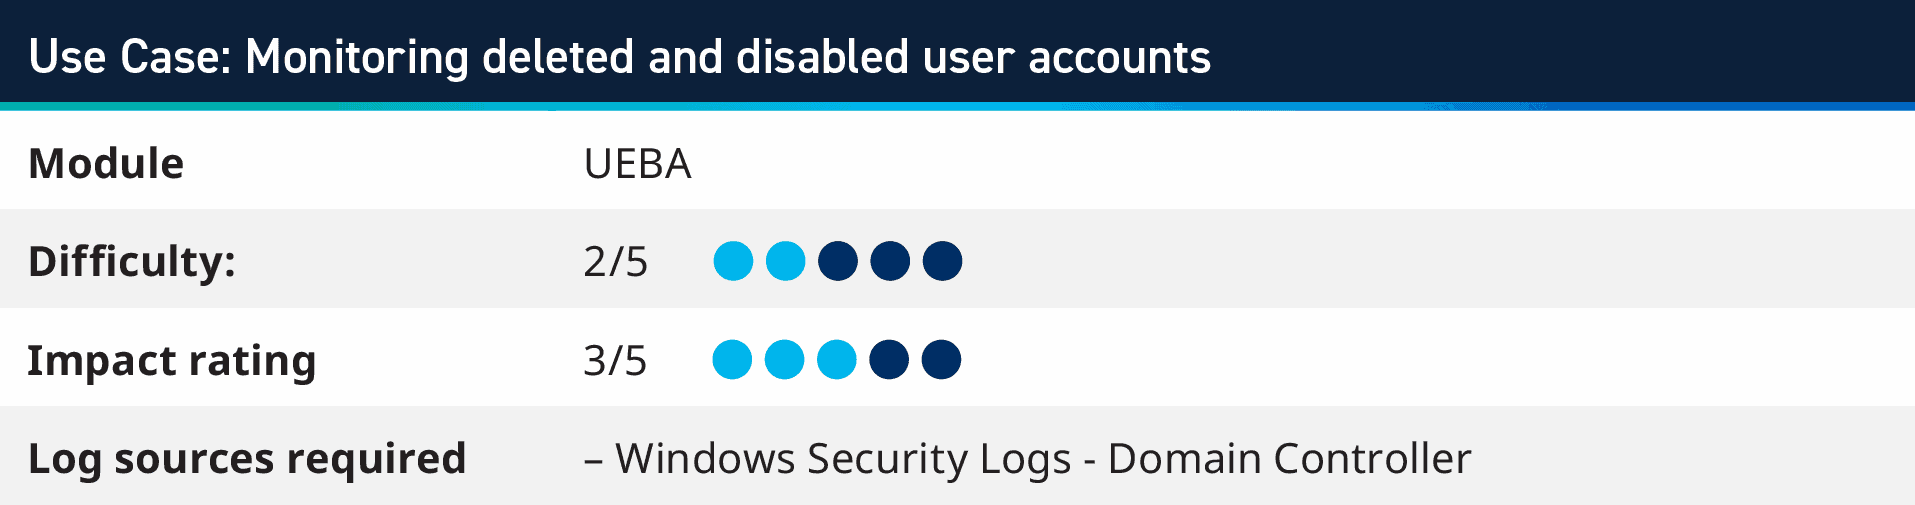 Monitoring deleted user accounts use case